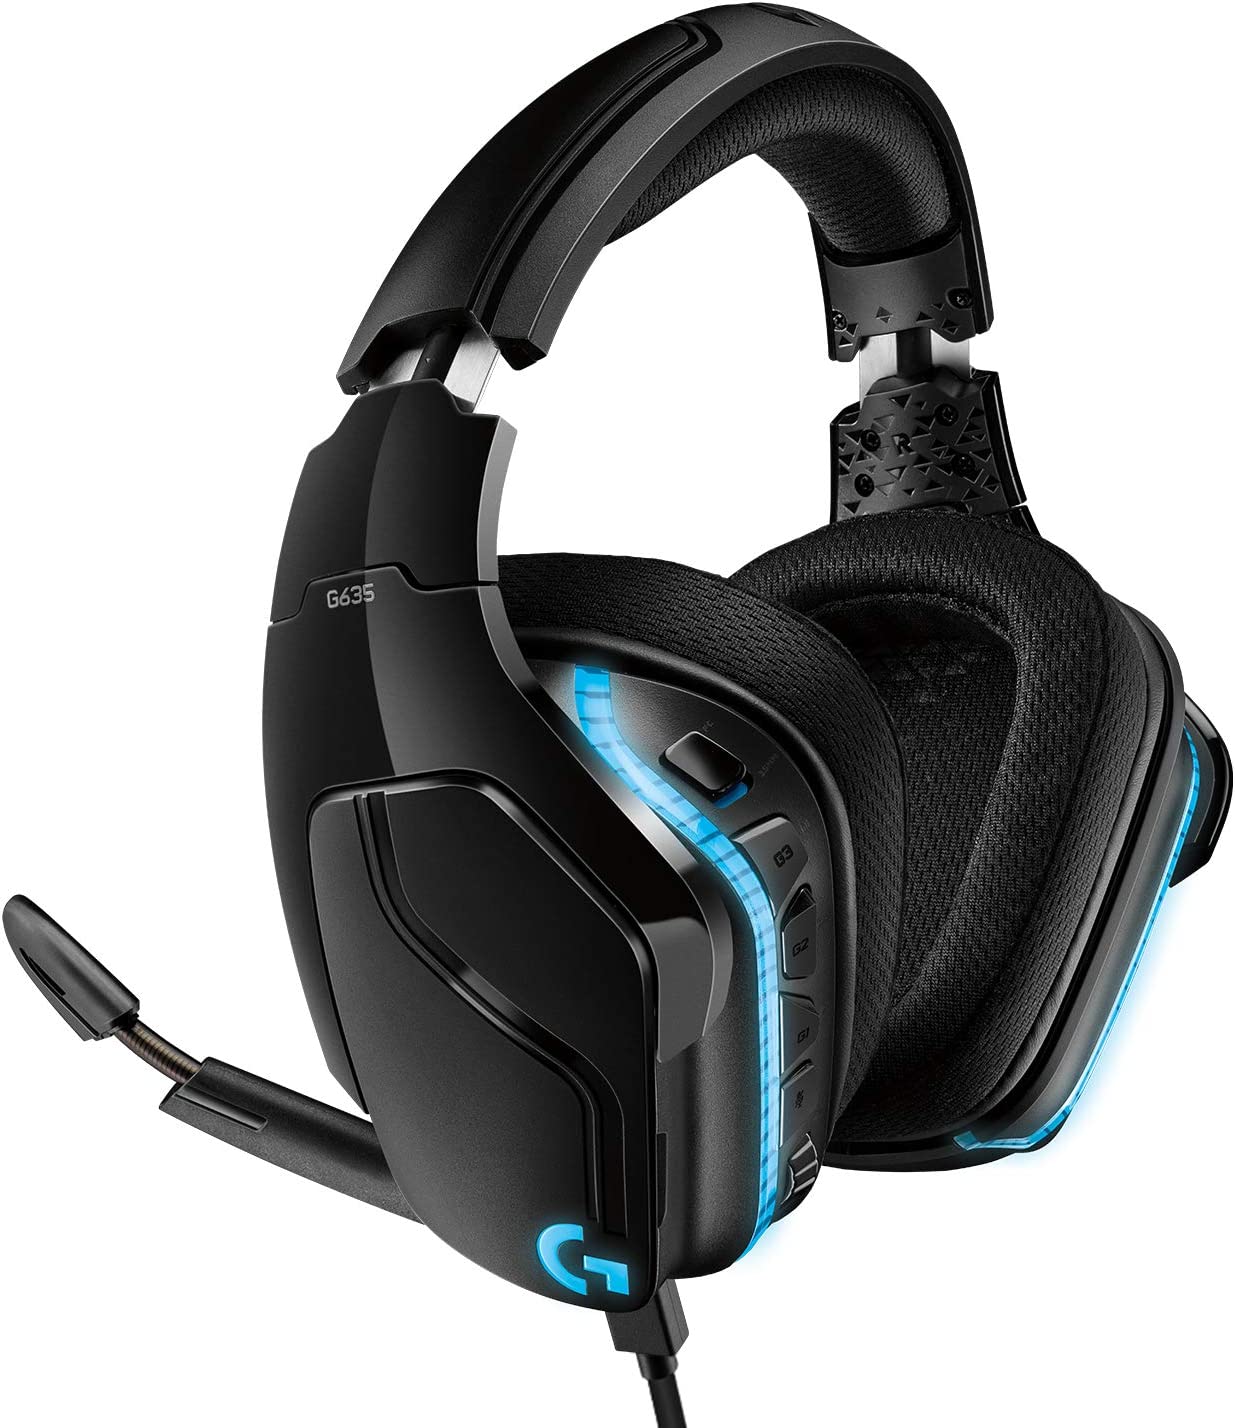 (C) Logitech G635 wired gaming headset with LIGHTSYNC